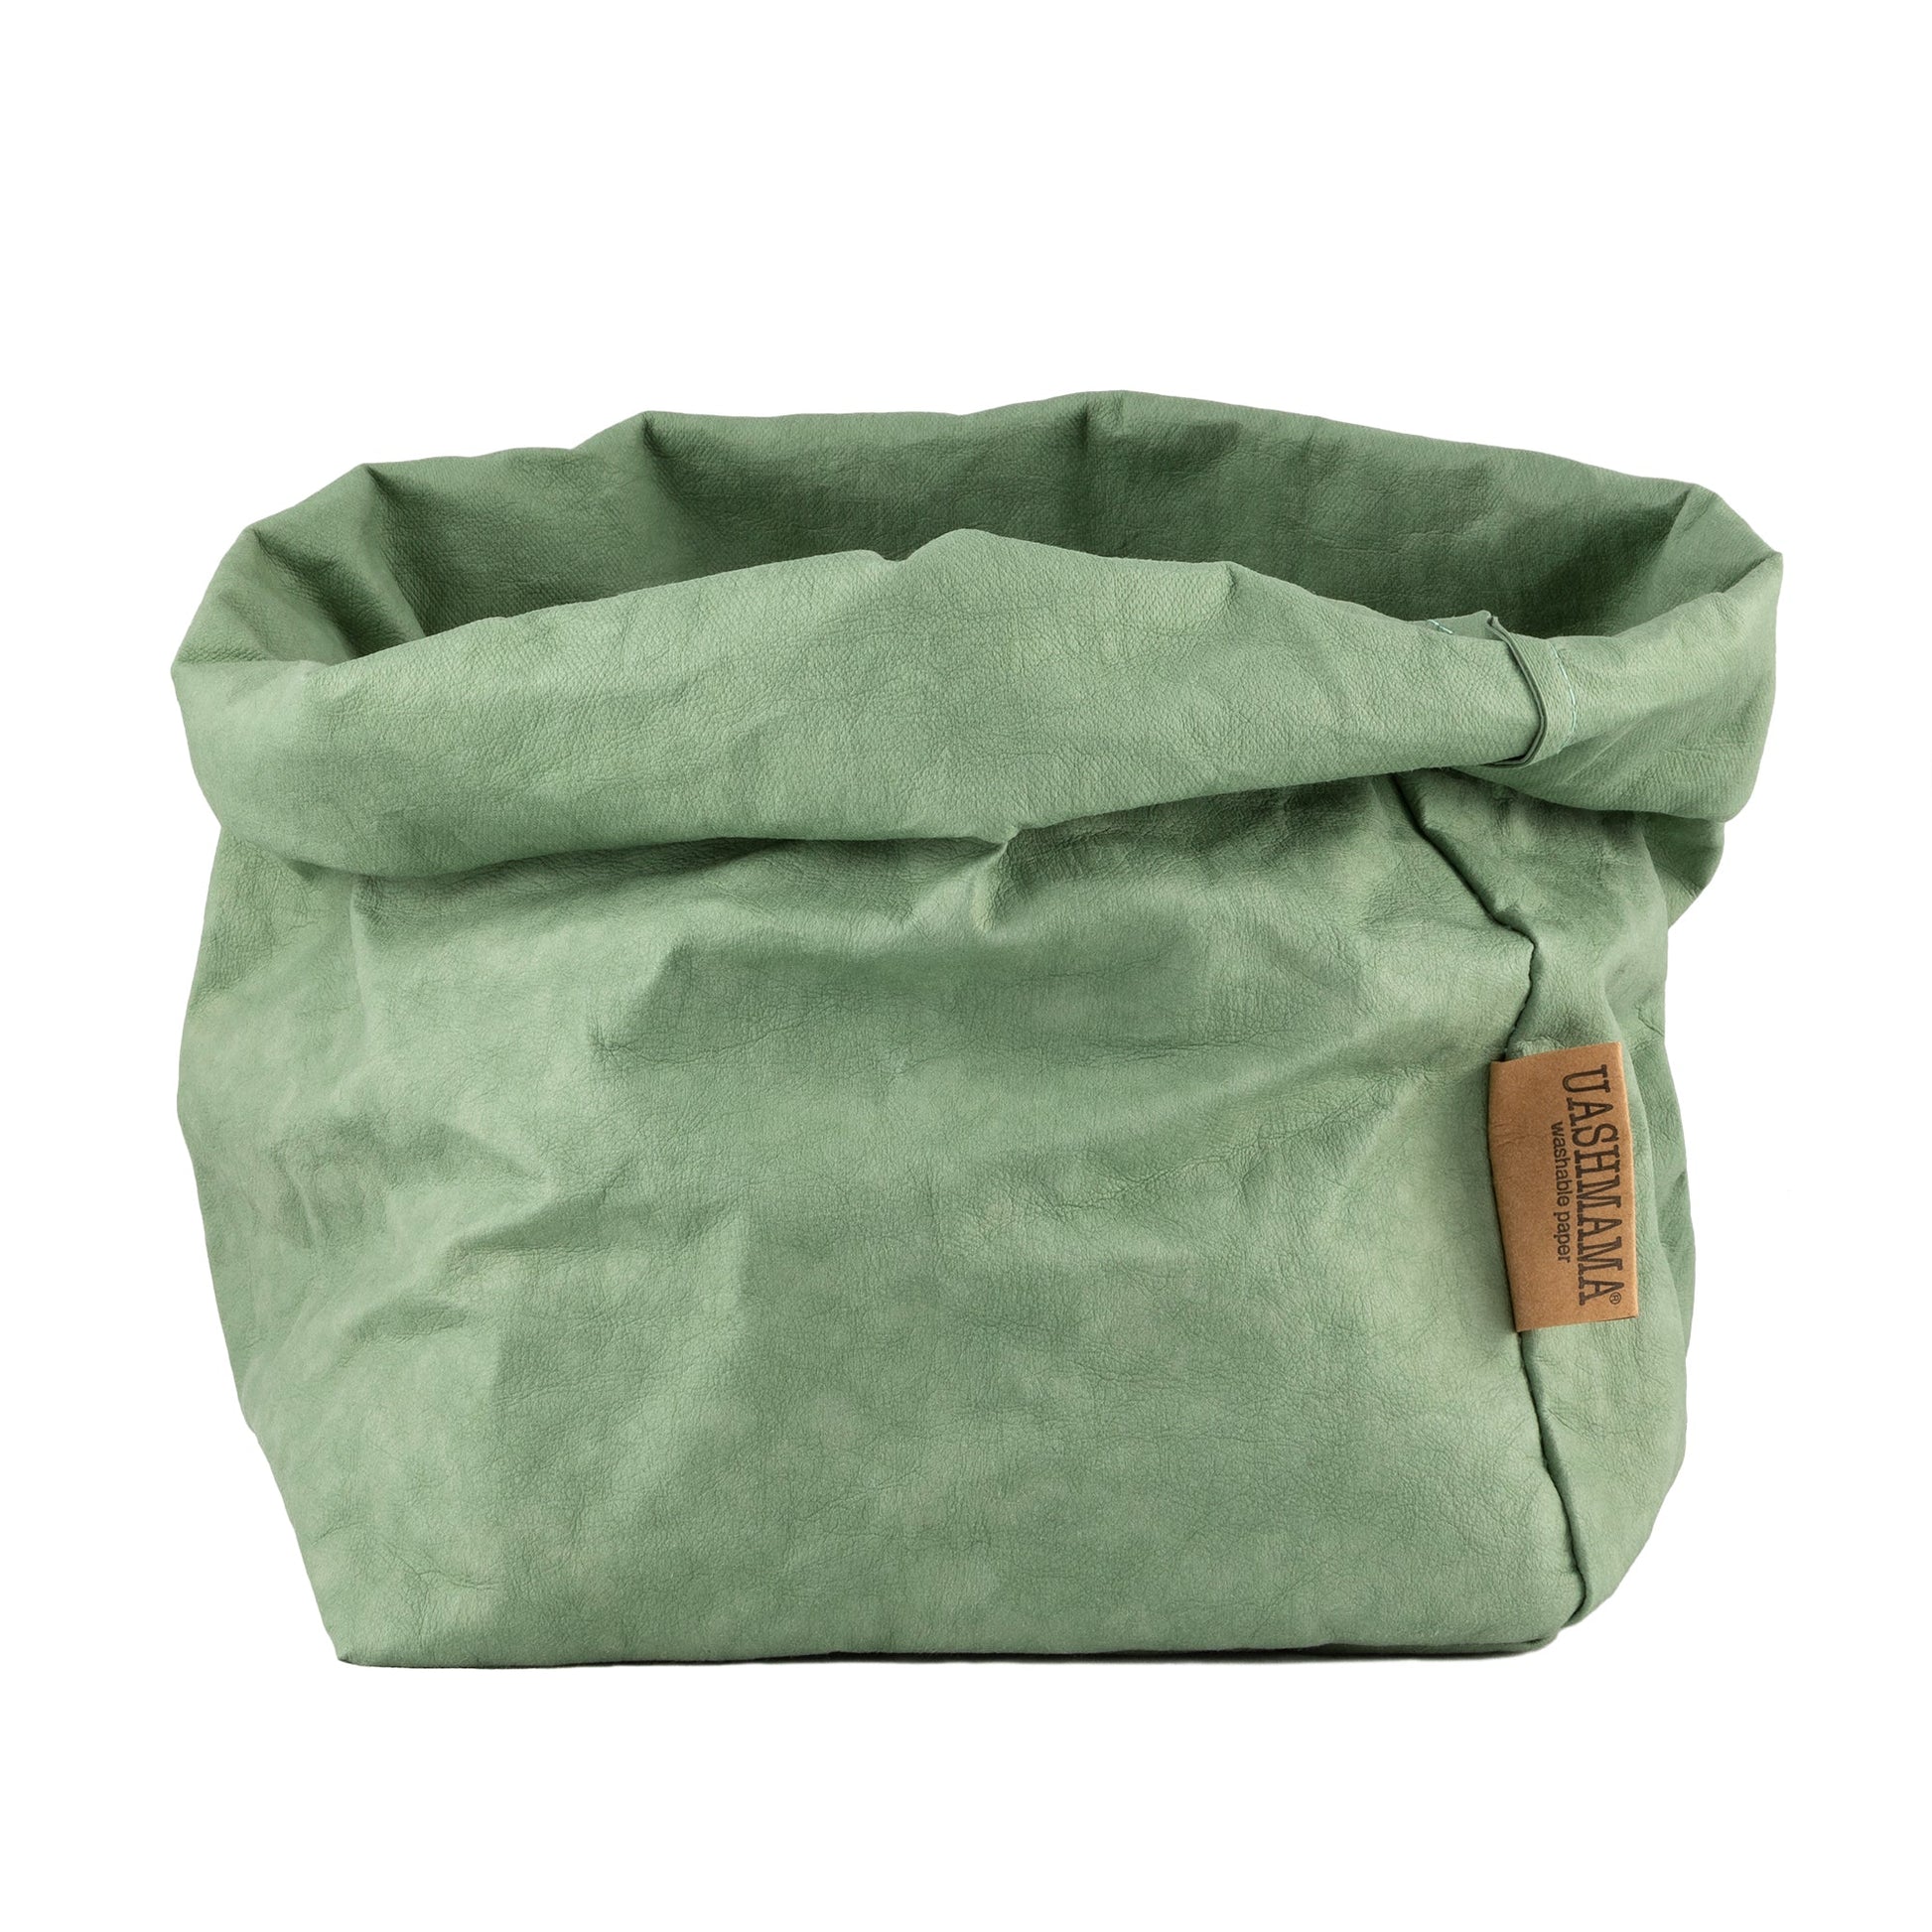 A washable paper bag is shown. The bag is rolled down at the top and features a UASHMAMA logo label on the bottom left corner. The bag pictured is the large plus size in green.